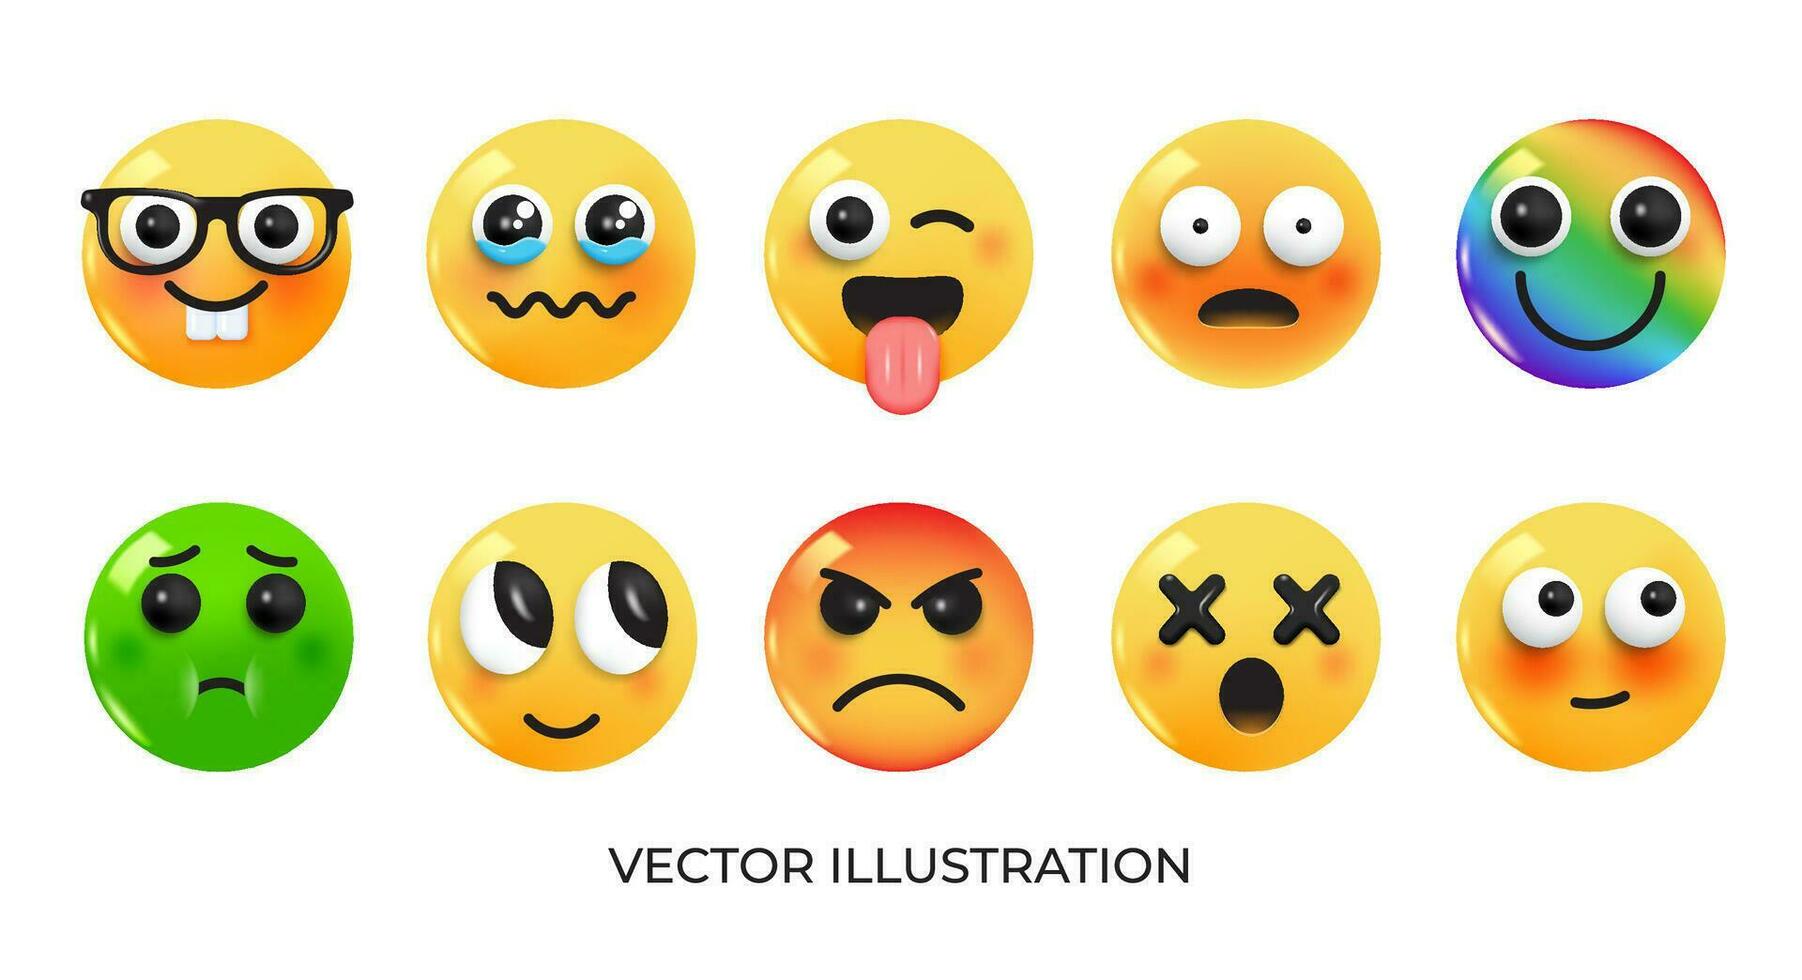 A set of emoticions with different expressions vector